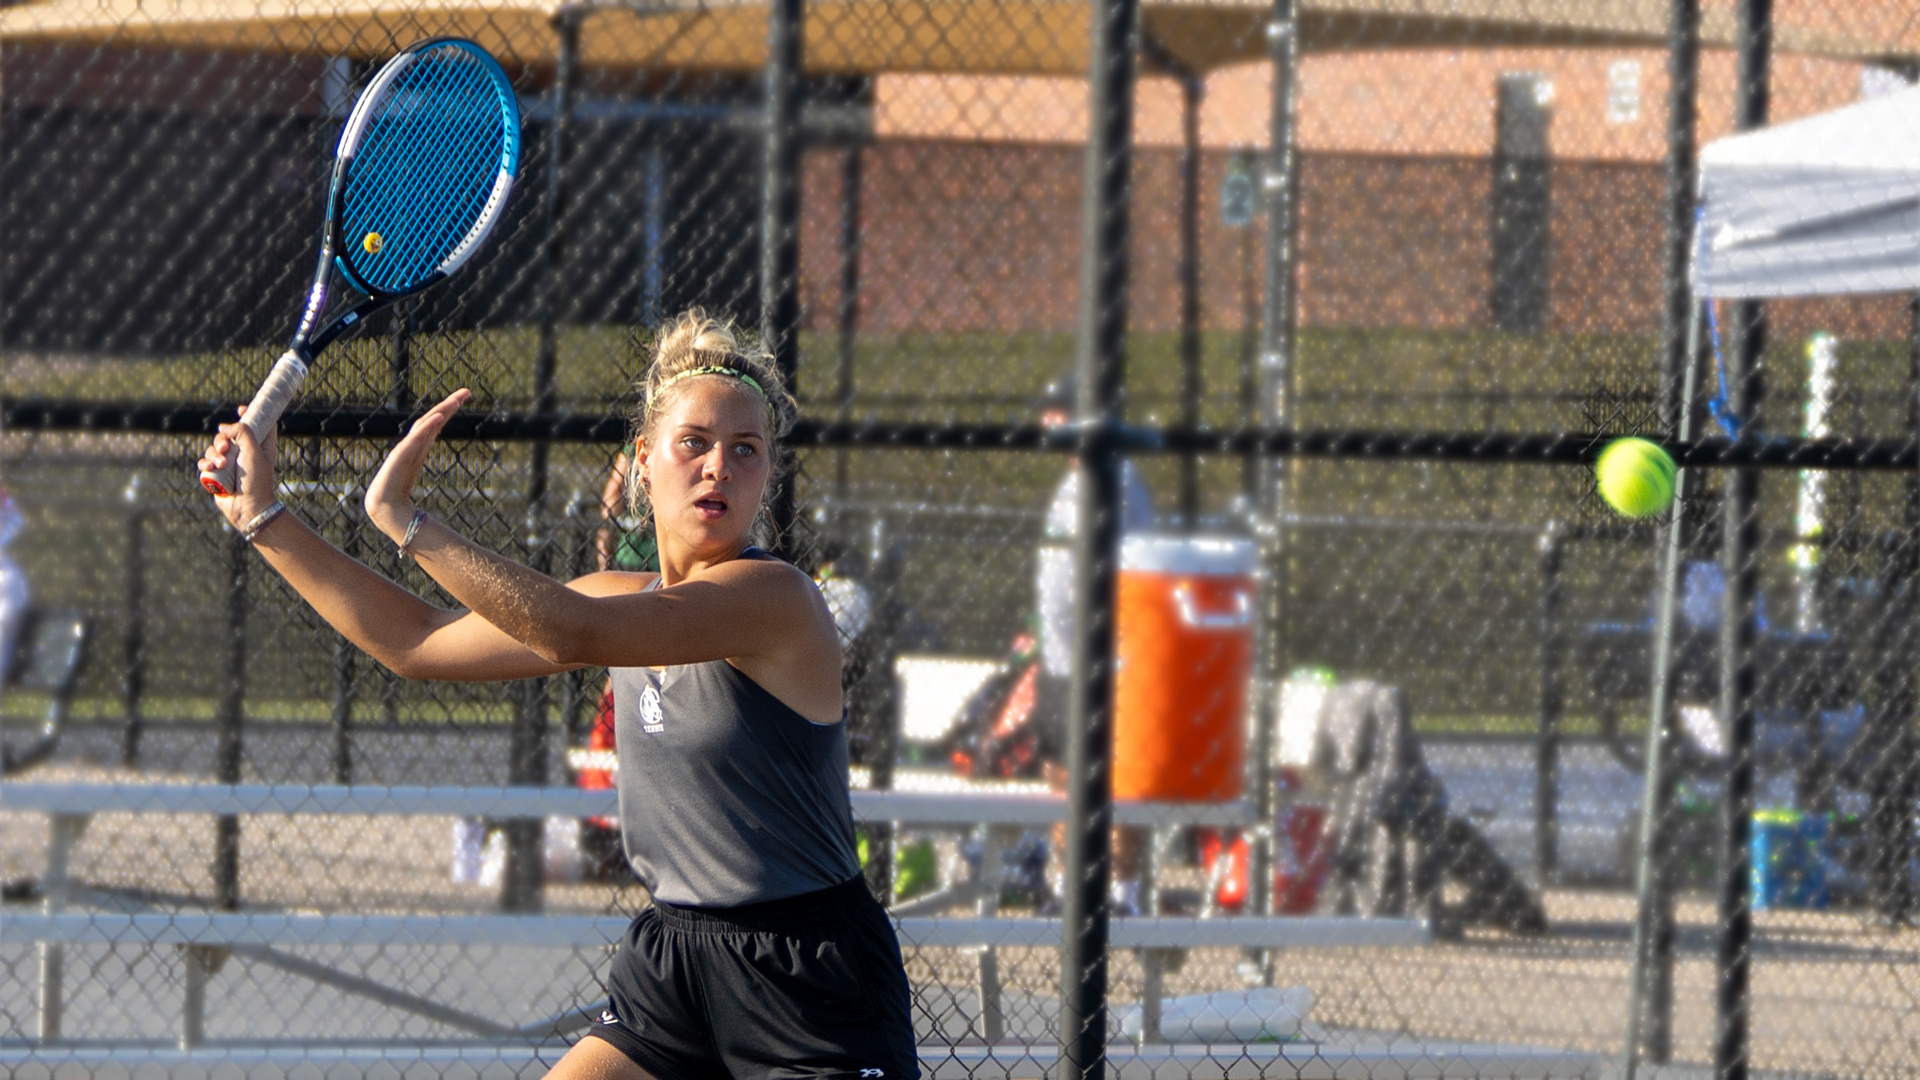 Top-ranked Lady Tigers pick up a pair of 9-0 wins